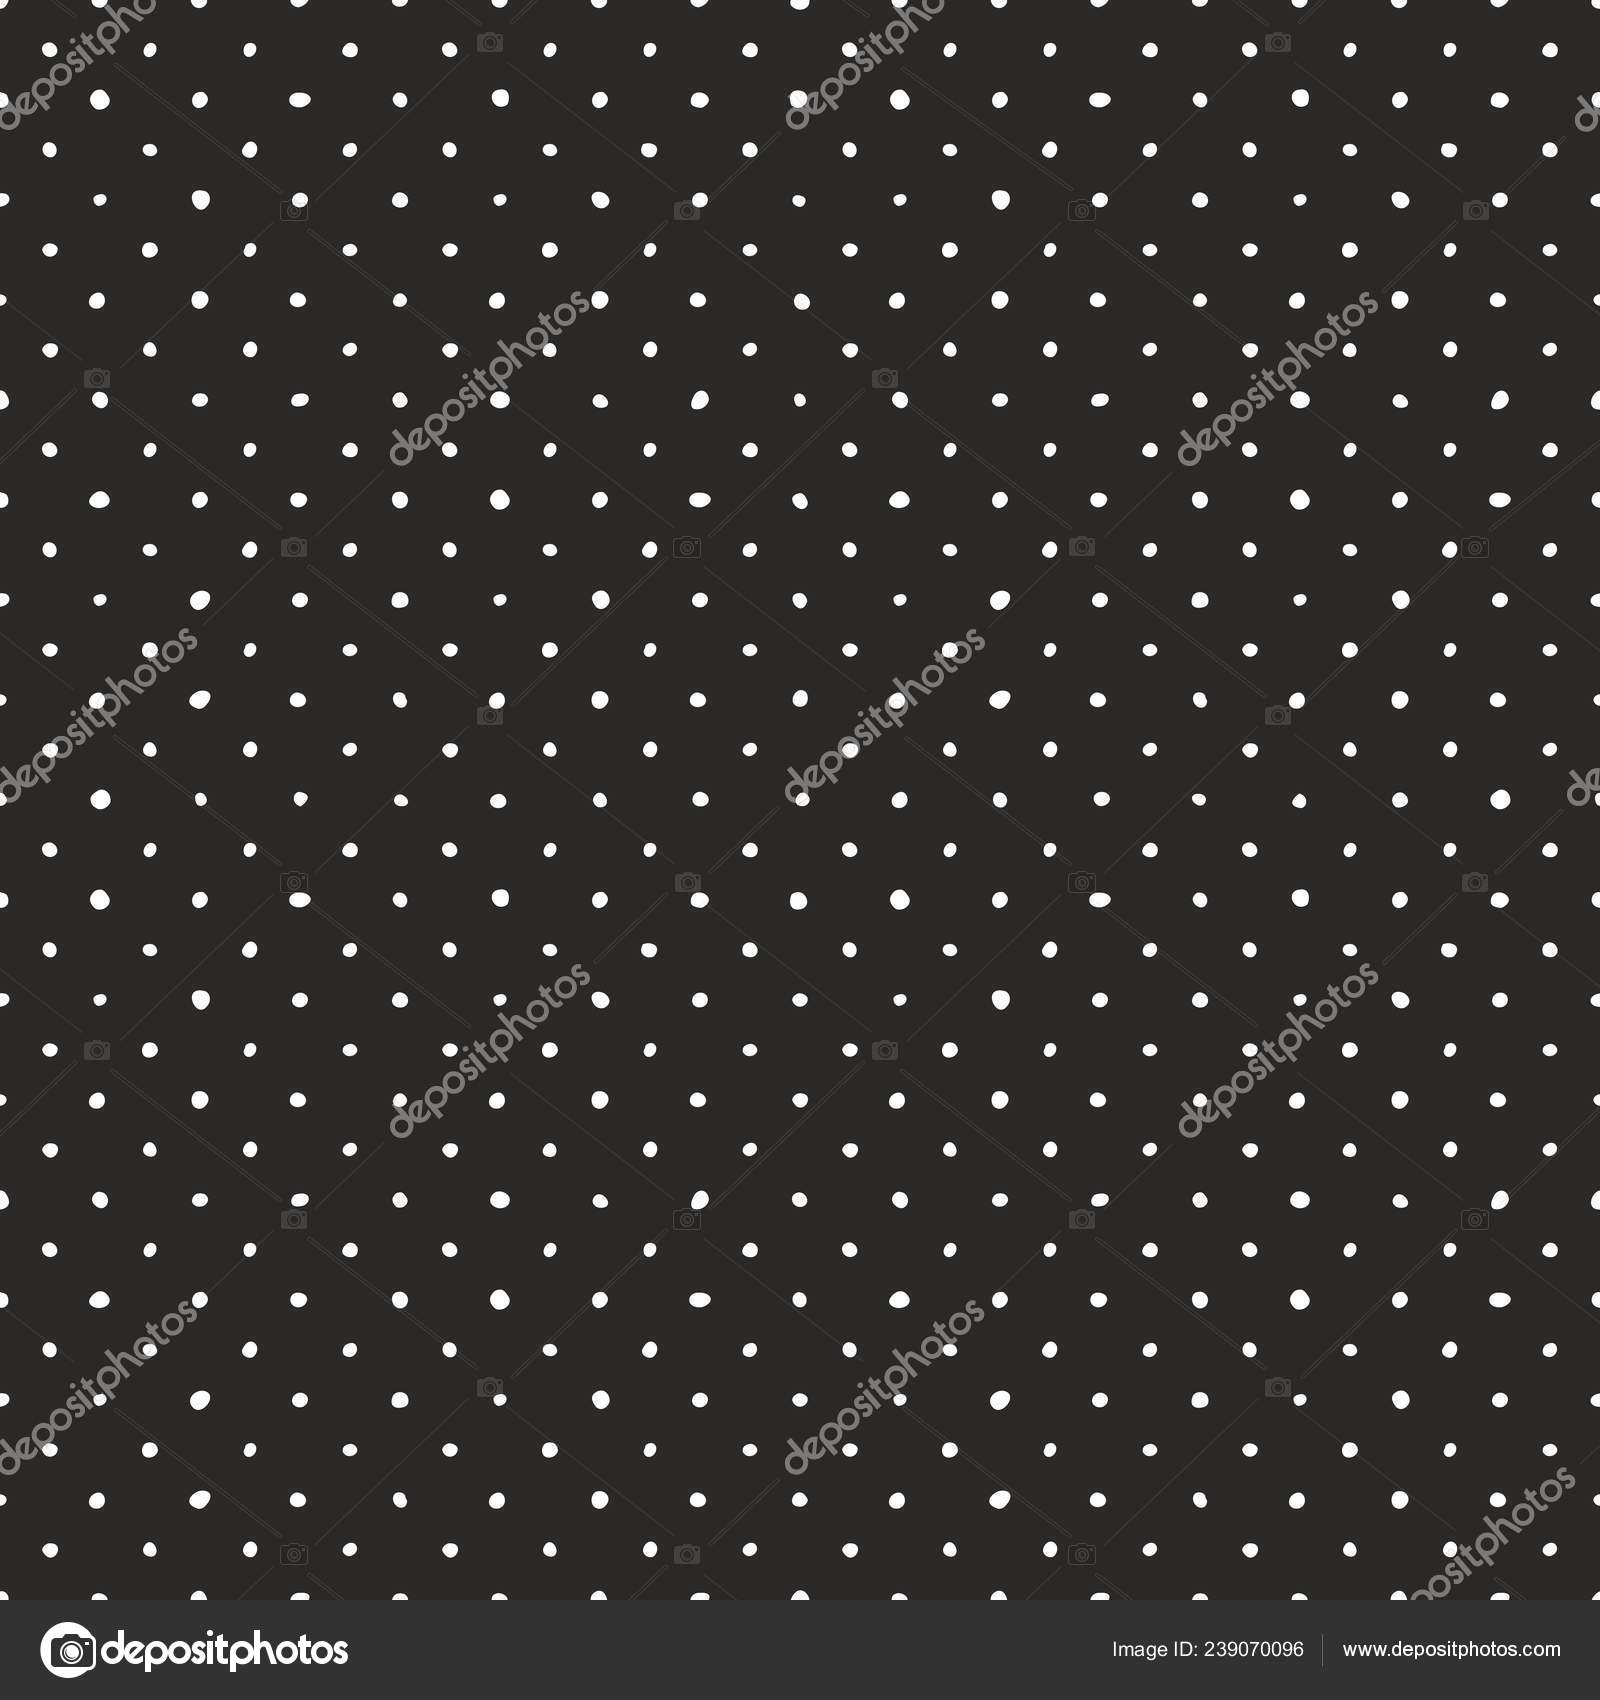 Seamless dark vector pattern with tile white polka dots on black background